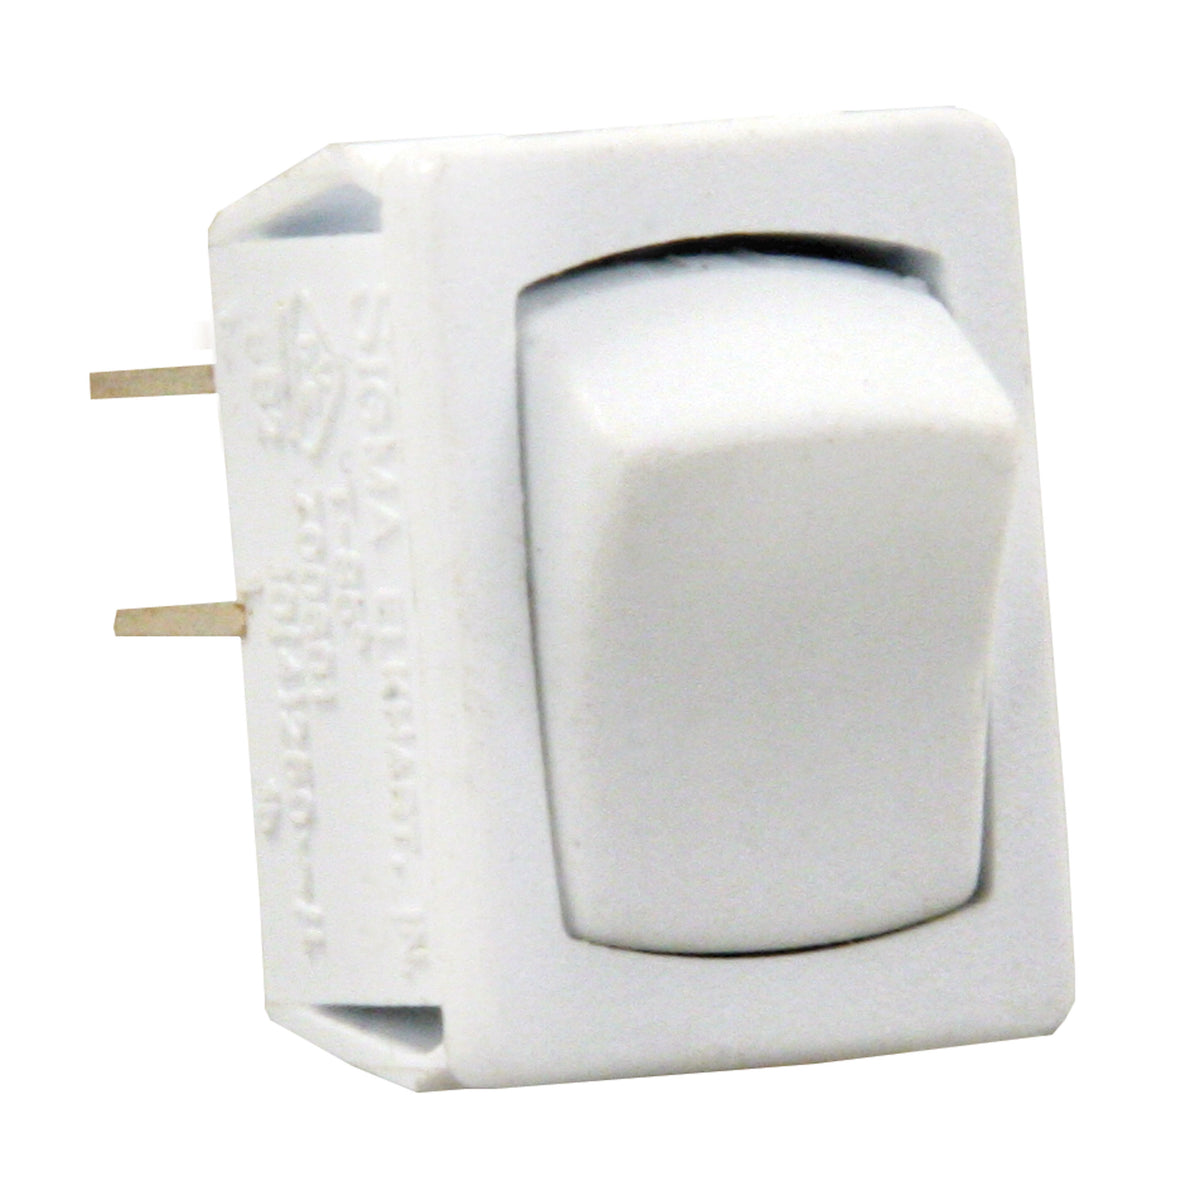 JR Products 13641-5 Mini On/Off Switches, Pack of 5 - White